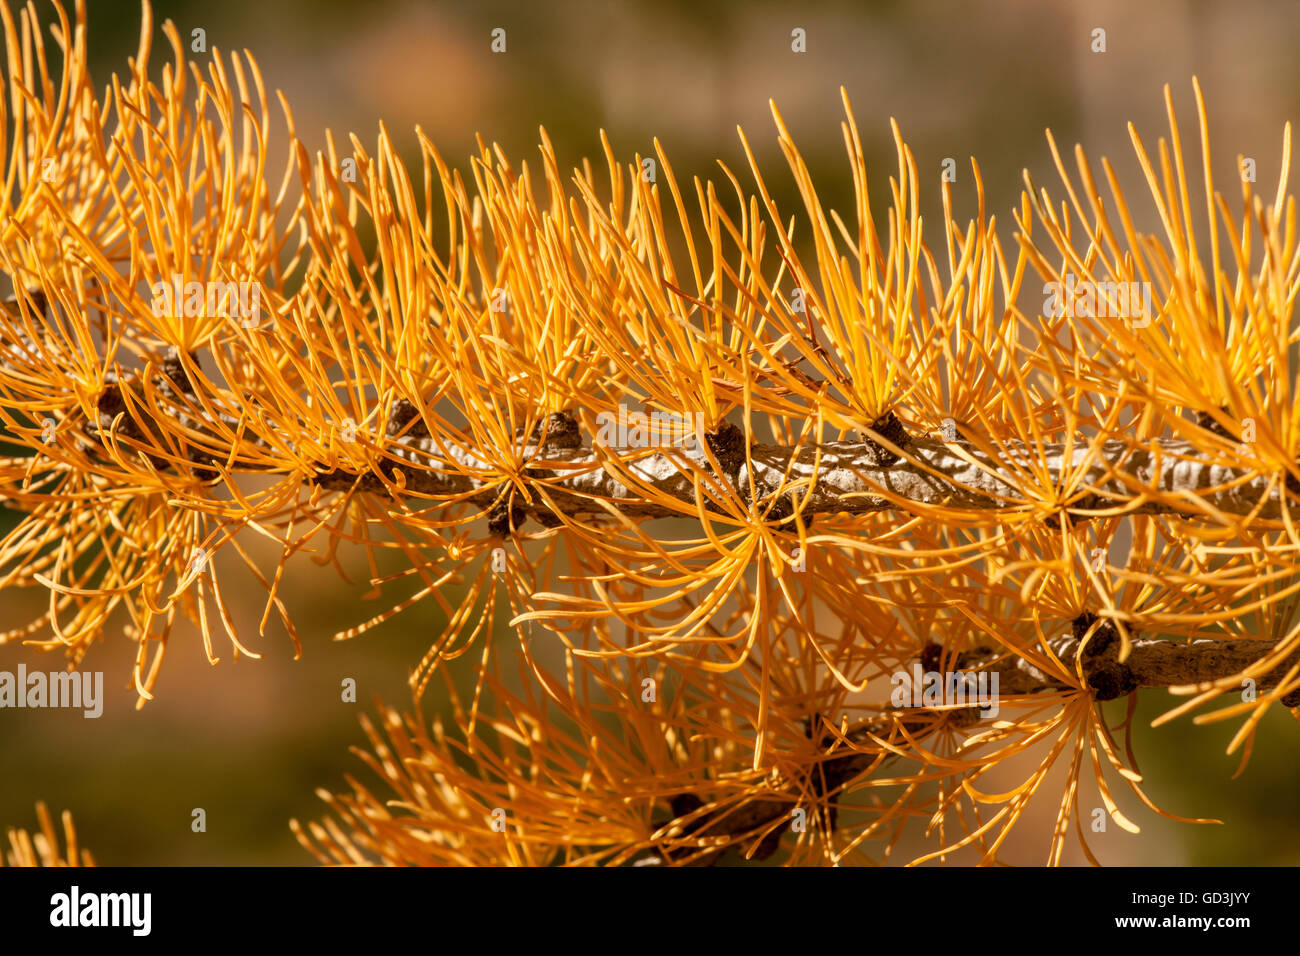 Close-up of the branch of a Western Larch tree in Autumn, found along Route 20 in western Washington, USA. Stock Photo